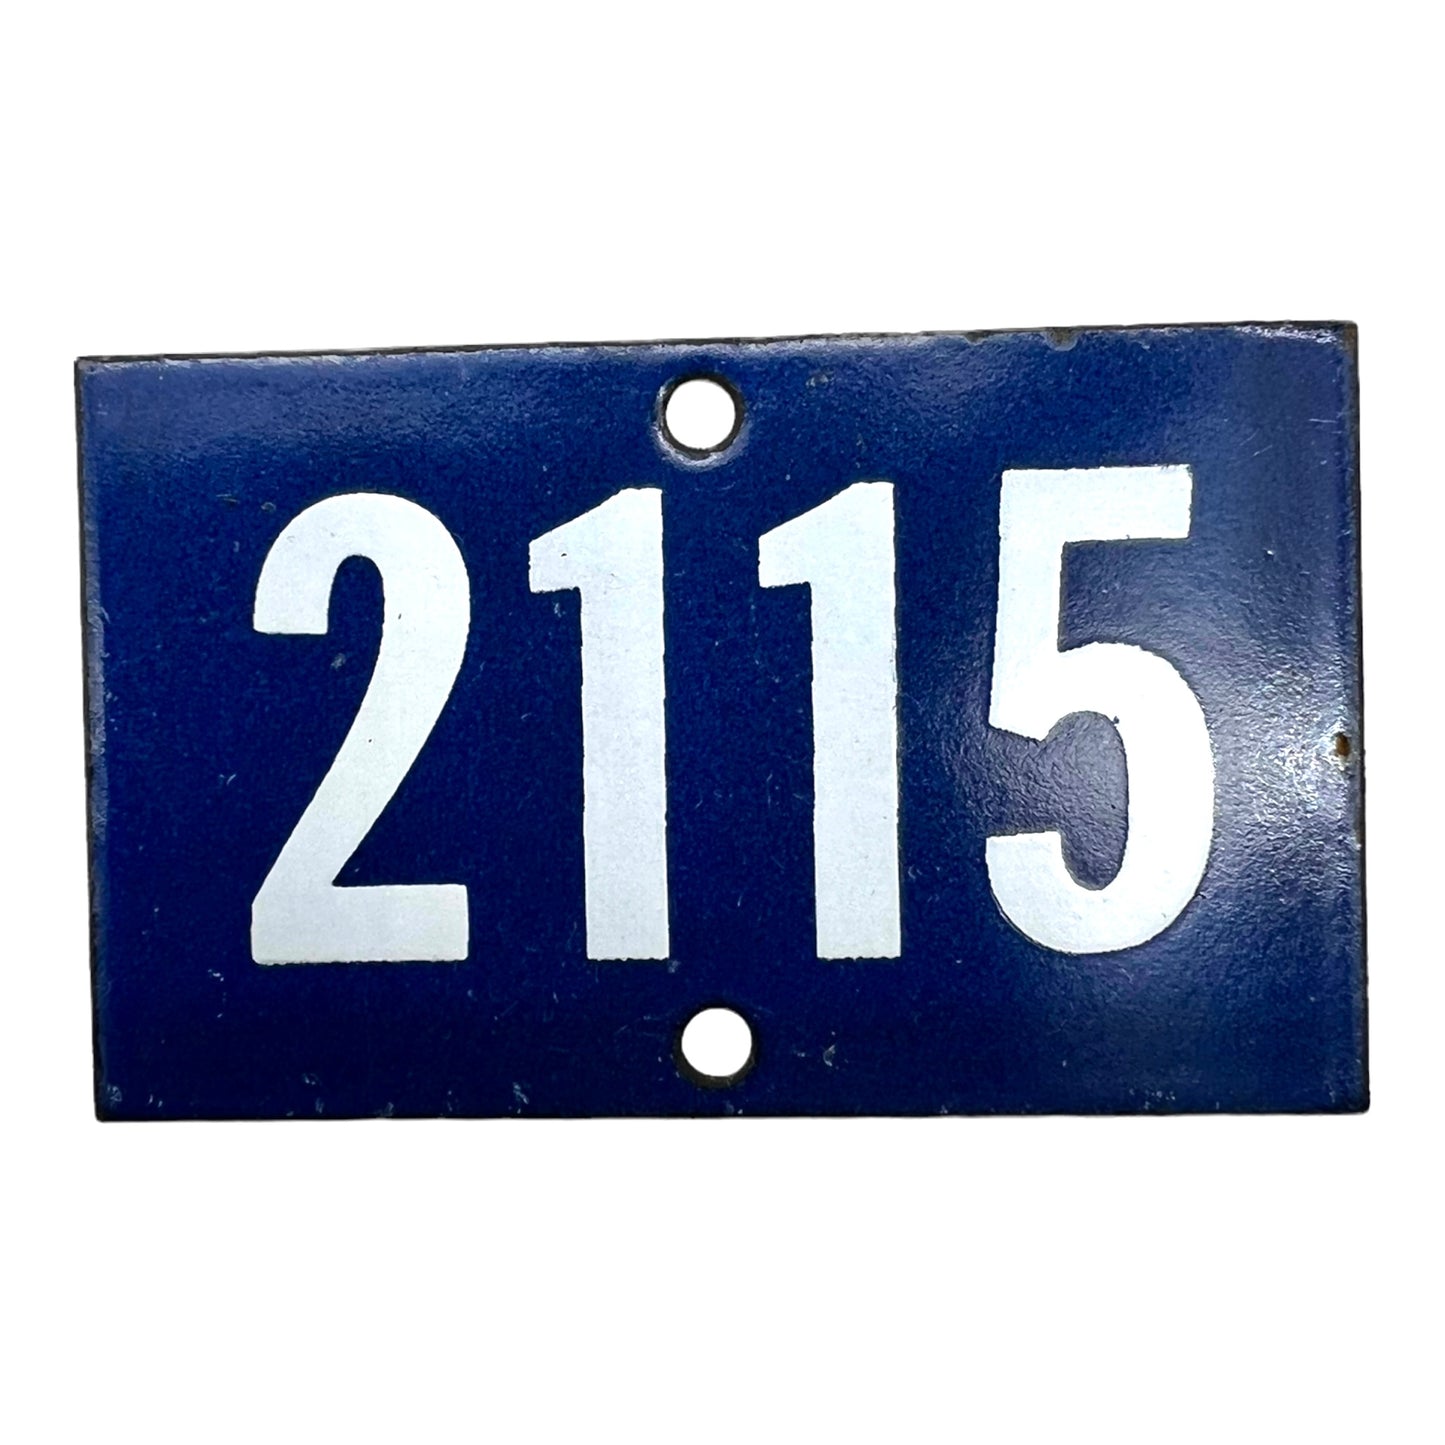 Image of blue enamel house or door number 2115 sold by All Things French Store